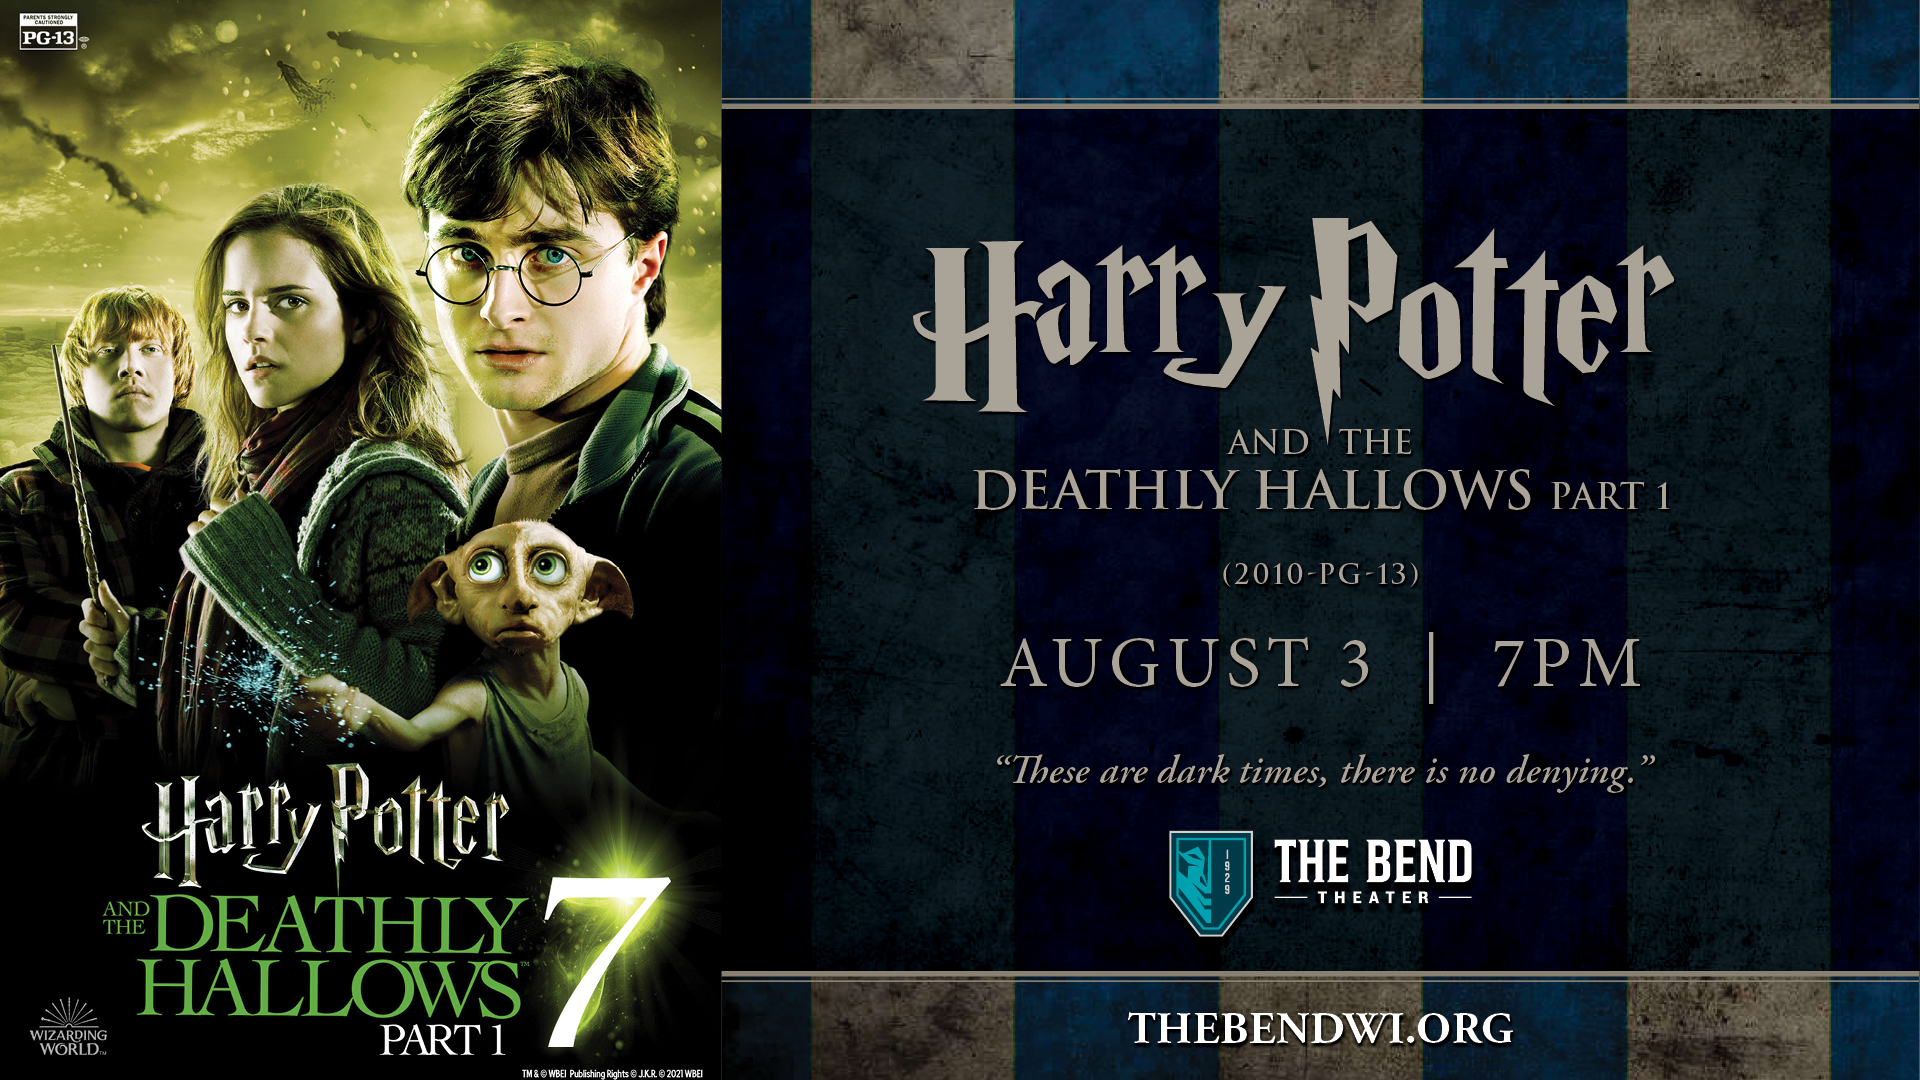 The Bend Theater presents Harry Potter and The Deathly Hallows Part 1